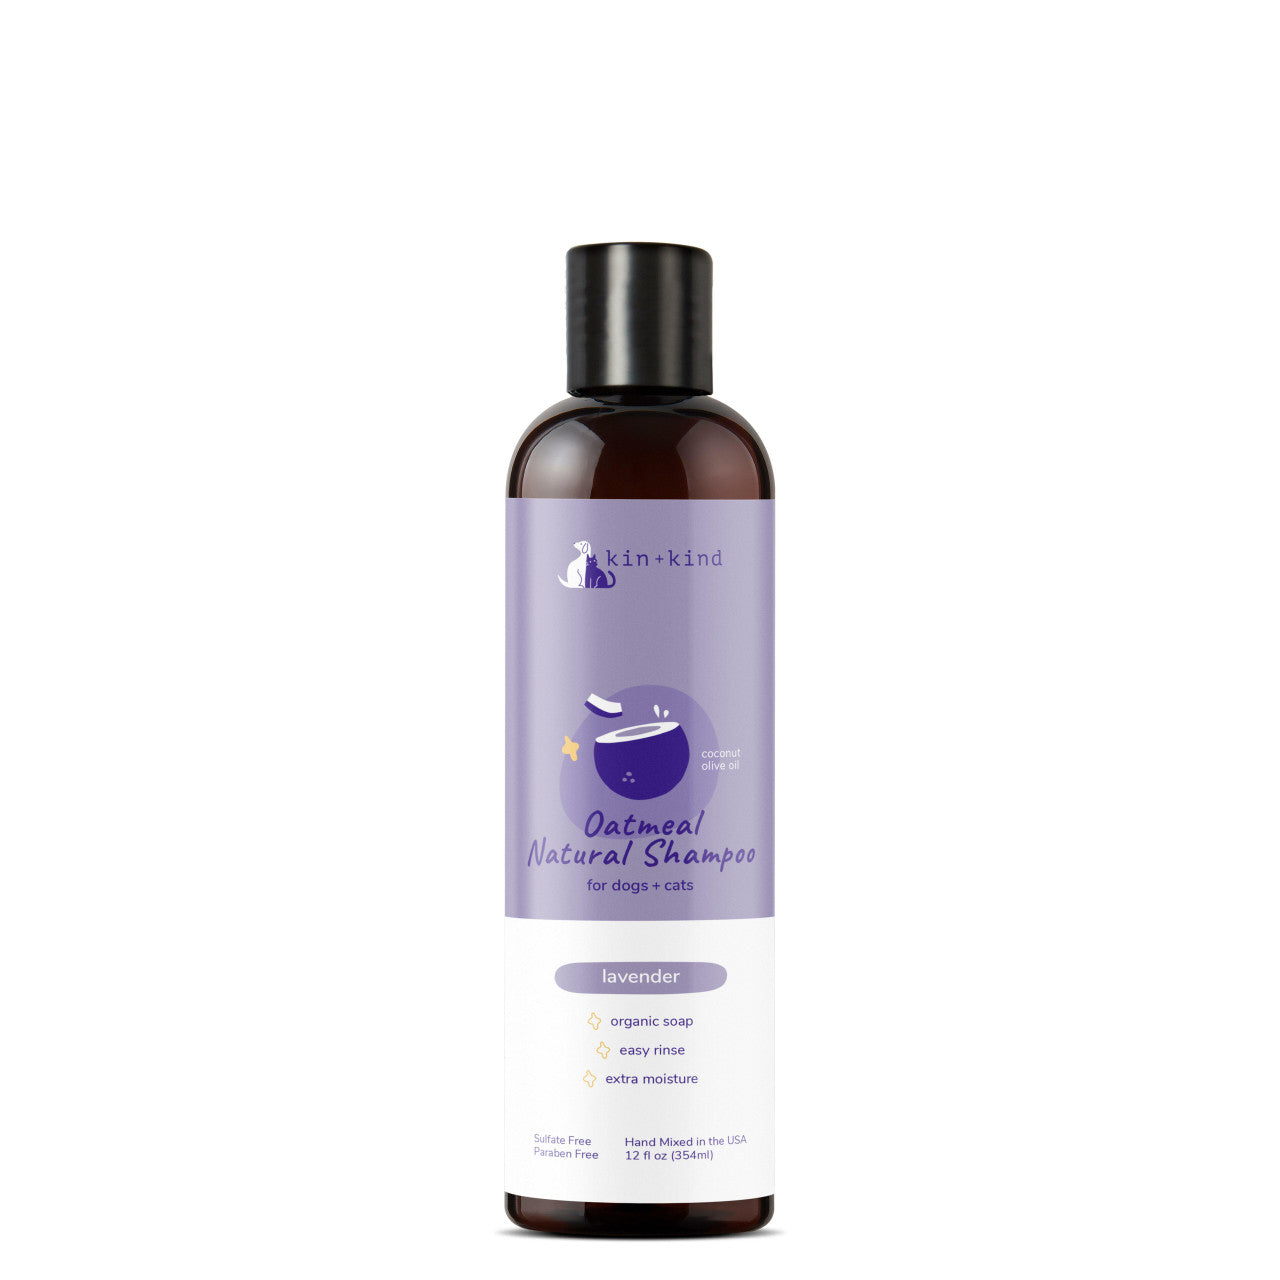 Oatmeal Natural Shampoo for Dogs & Cats Lavender 12 oz 850027253015